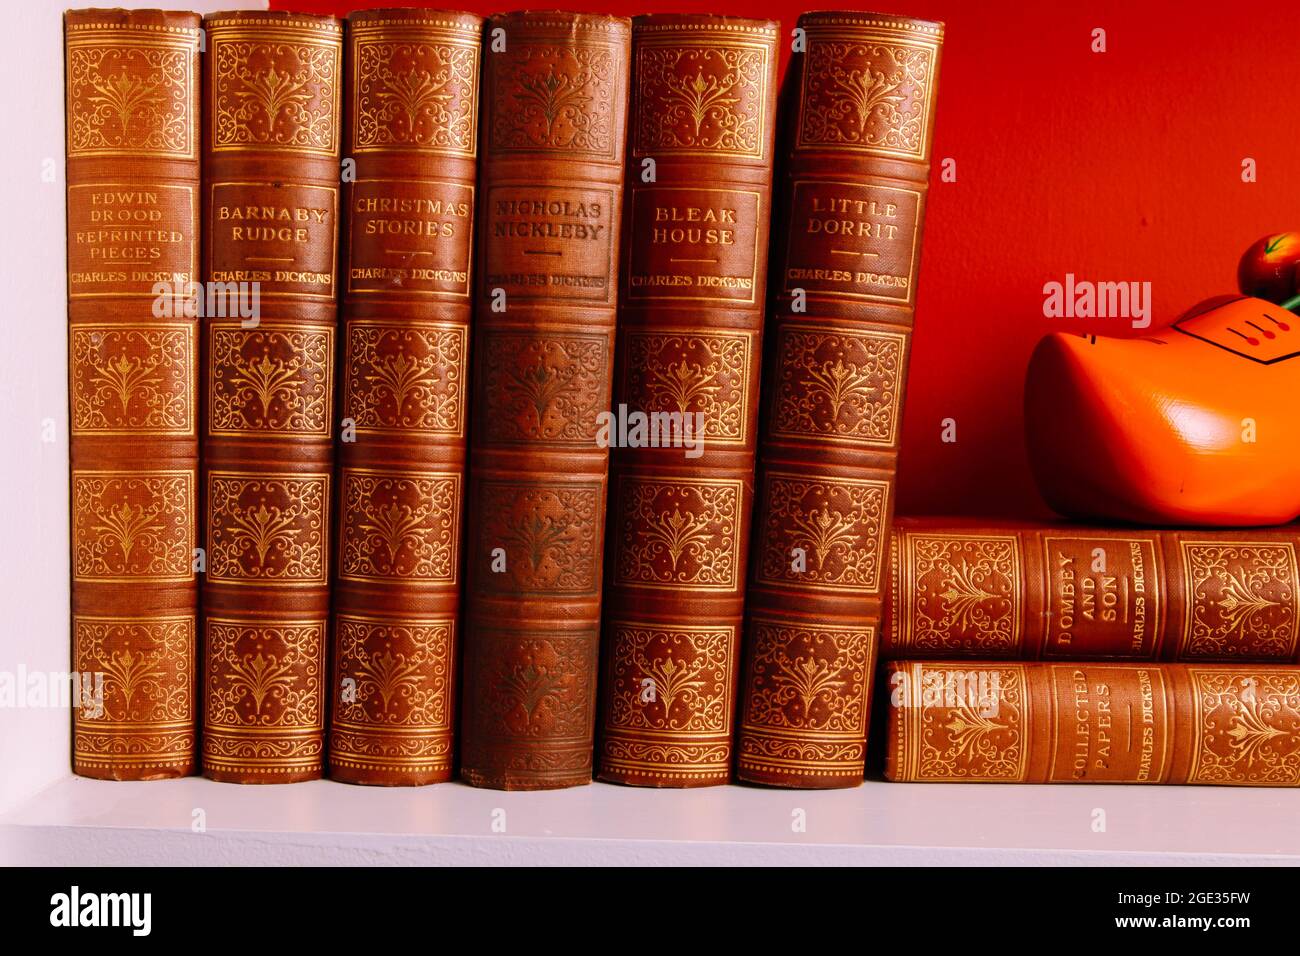 A collection of William Shakespeare novels on book shelf with clog ornament. August 2021 Stock Photo